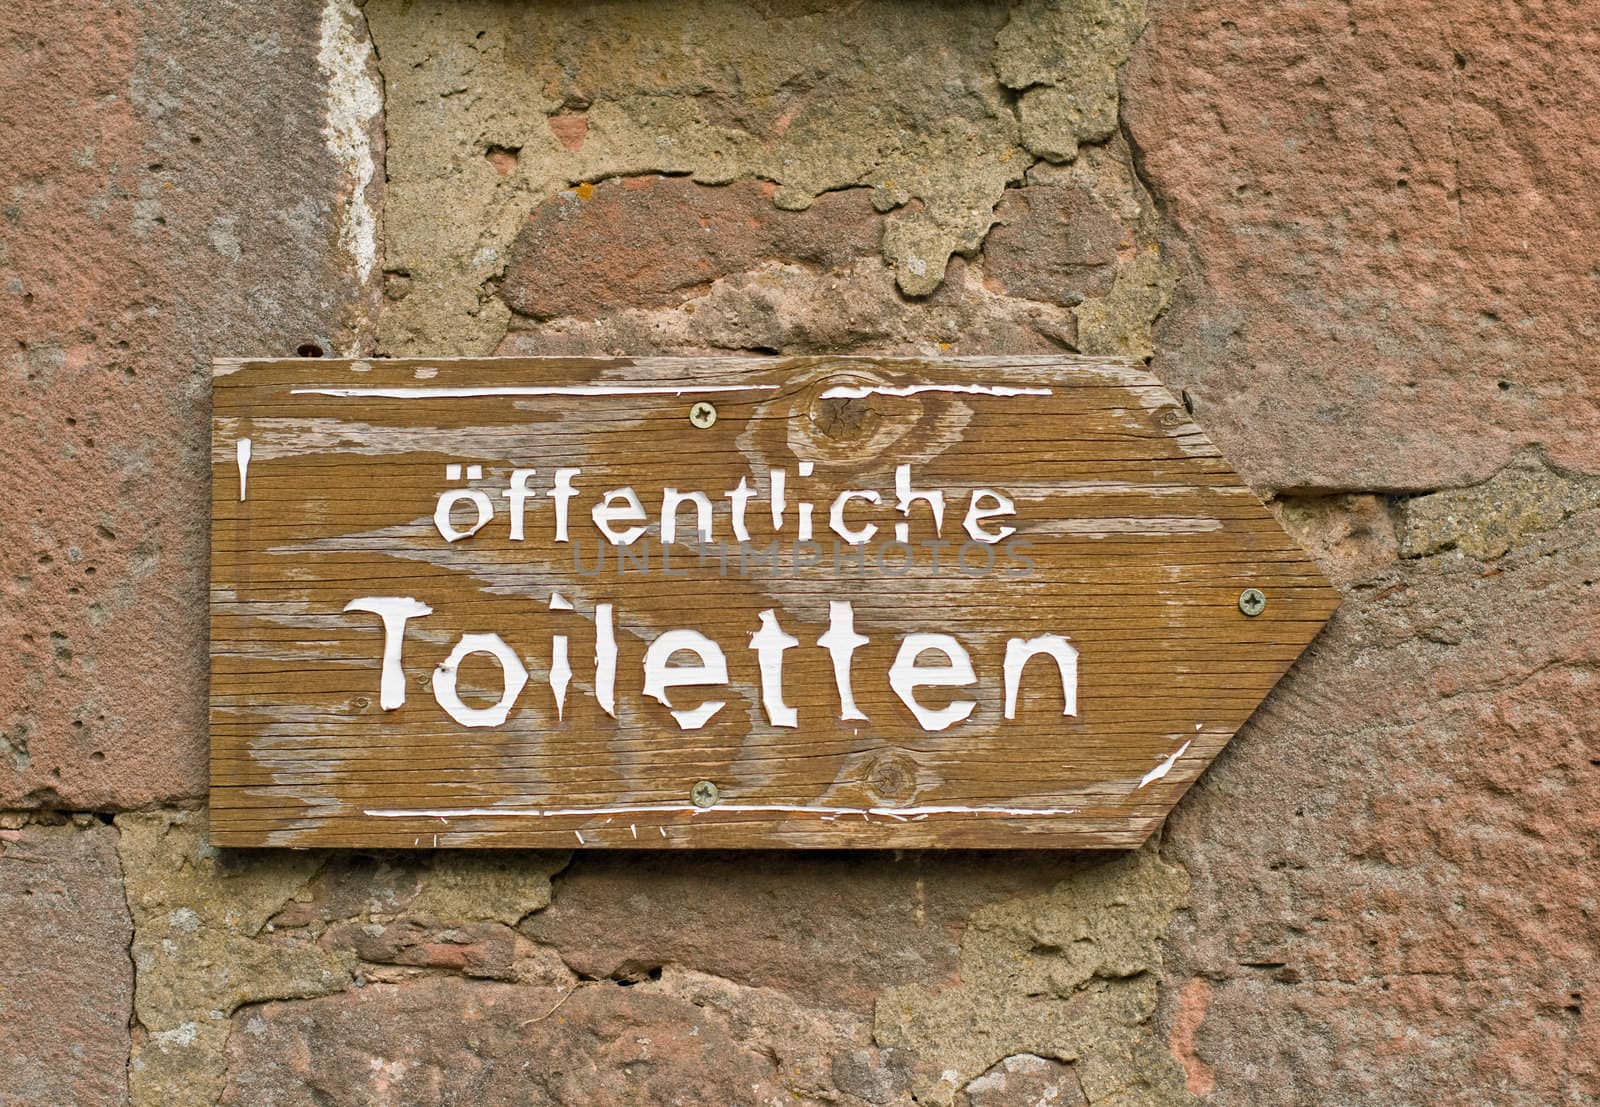 A wooden sign of public toilets WC restroom on a stone wall